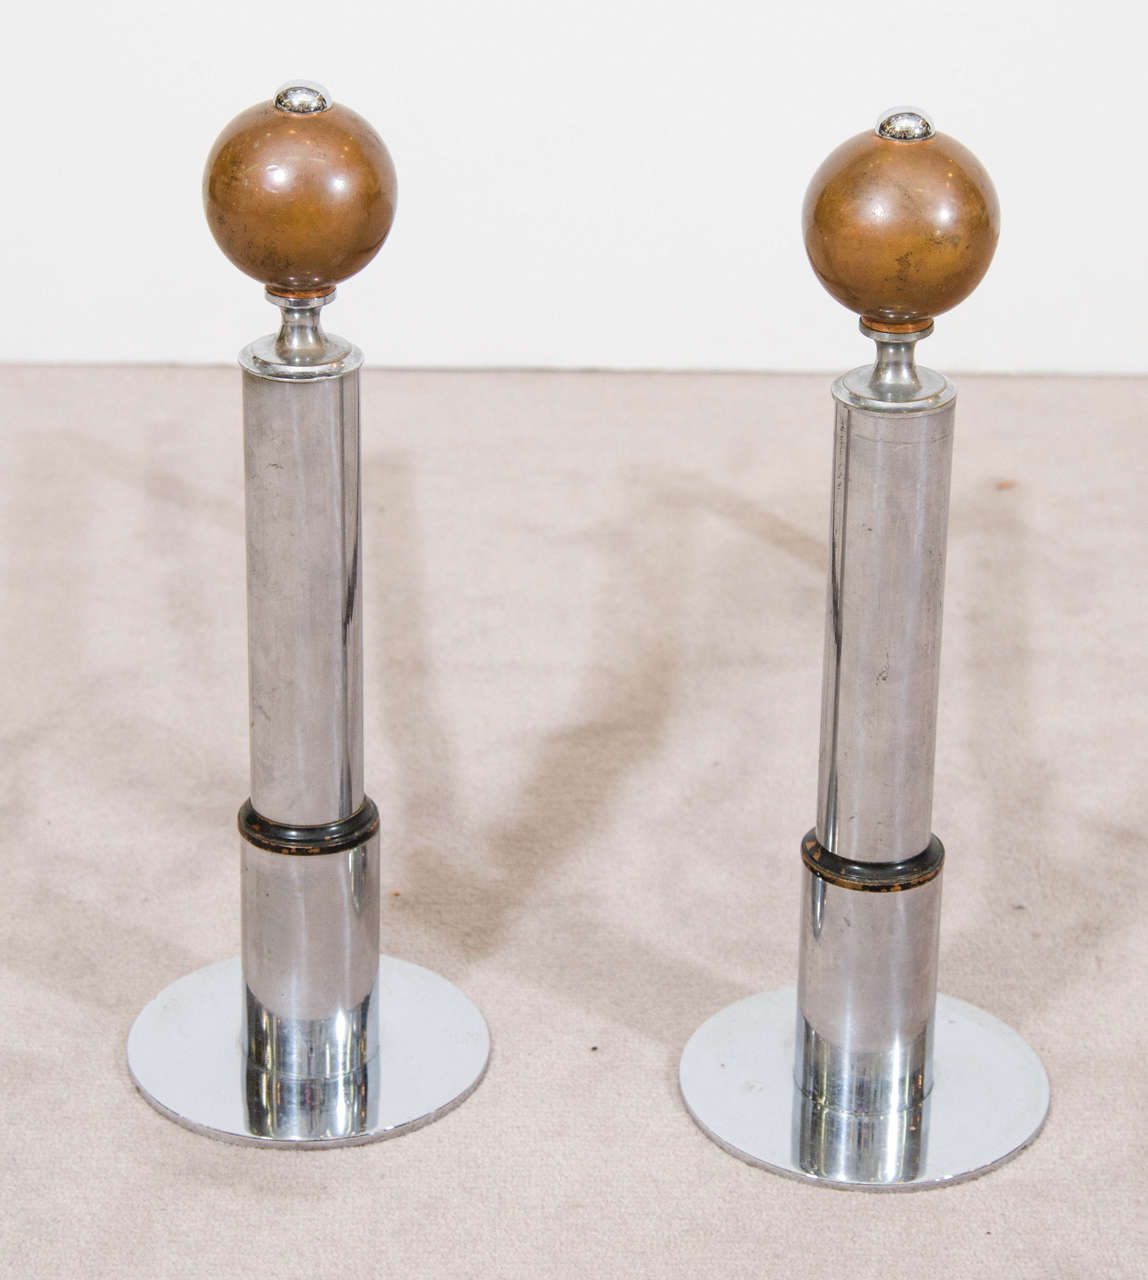 20th Century Art Deco Pair of Chrome Andirons with Cylindrical Body and Copper Ball Finial